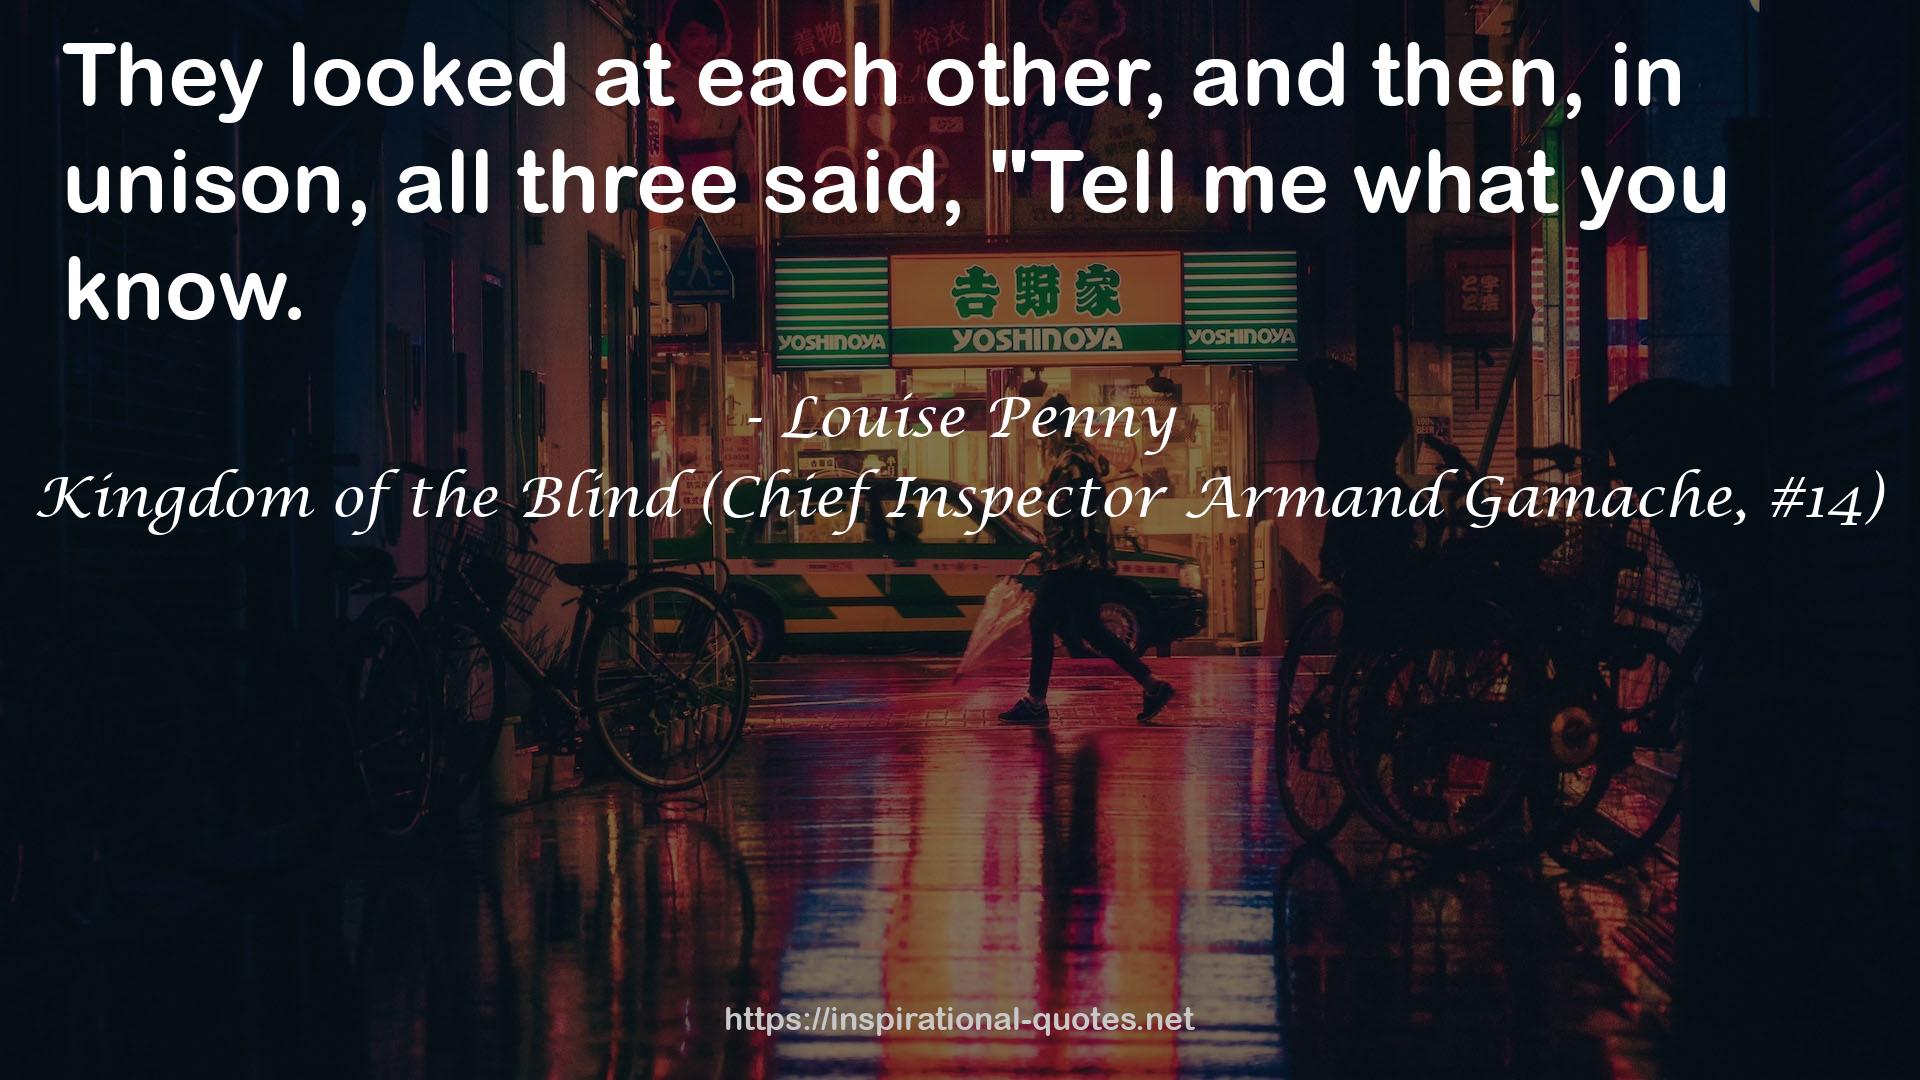 Kingdom of the Blind (Chief Inspector Armand Gamache, #14) QUOTES